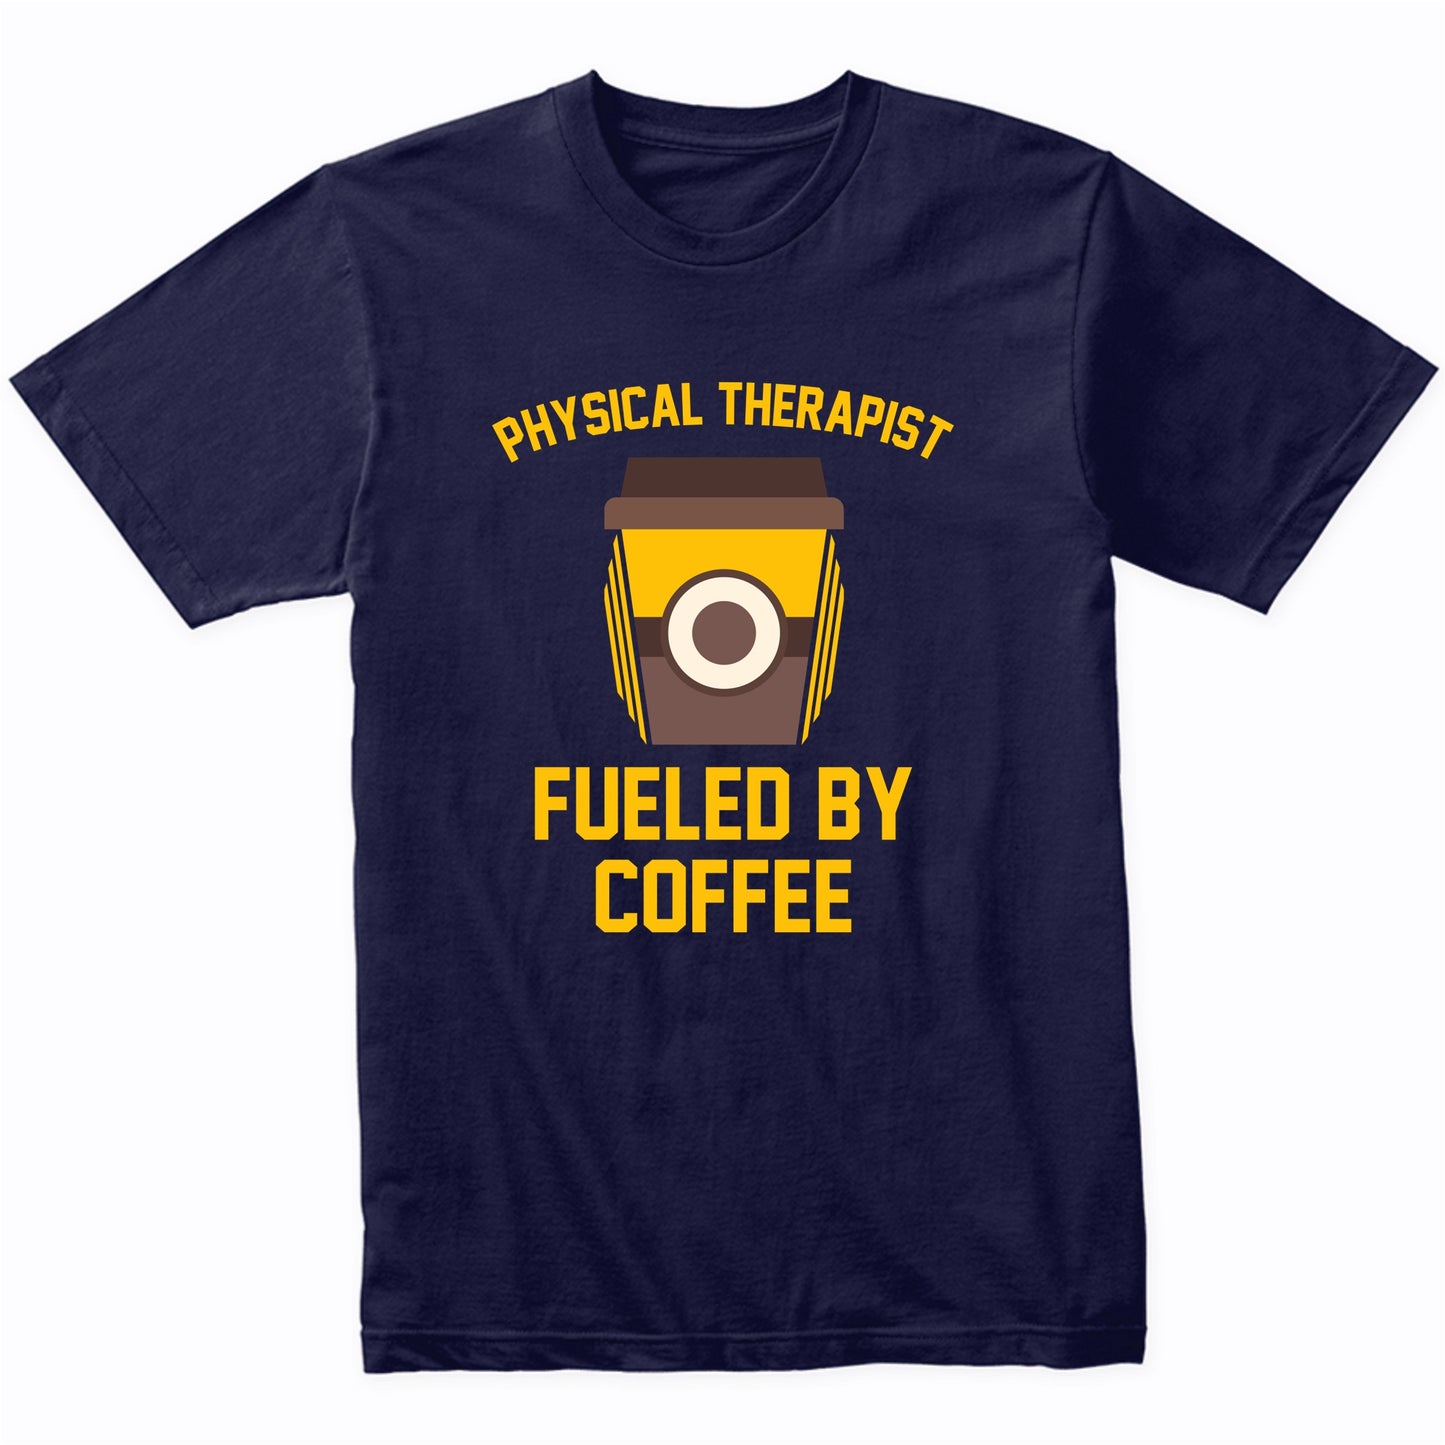 Physical Therapist Fueled By Coffee Funny Shirt